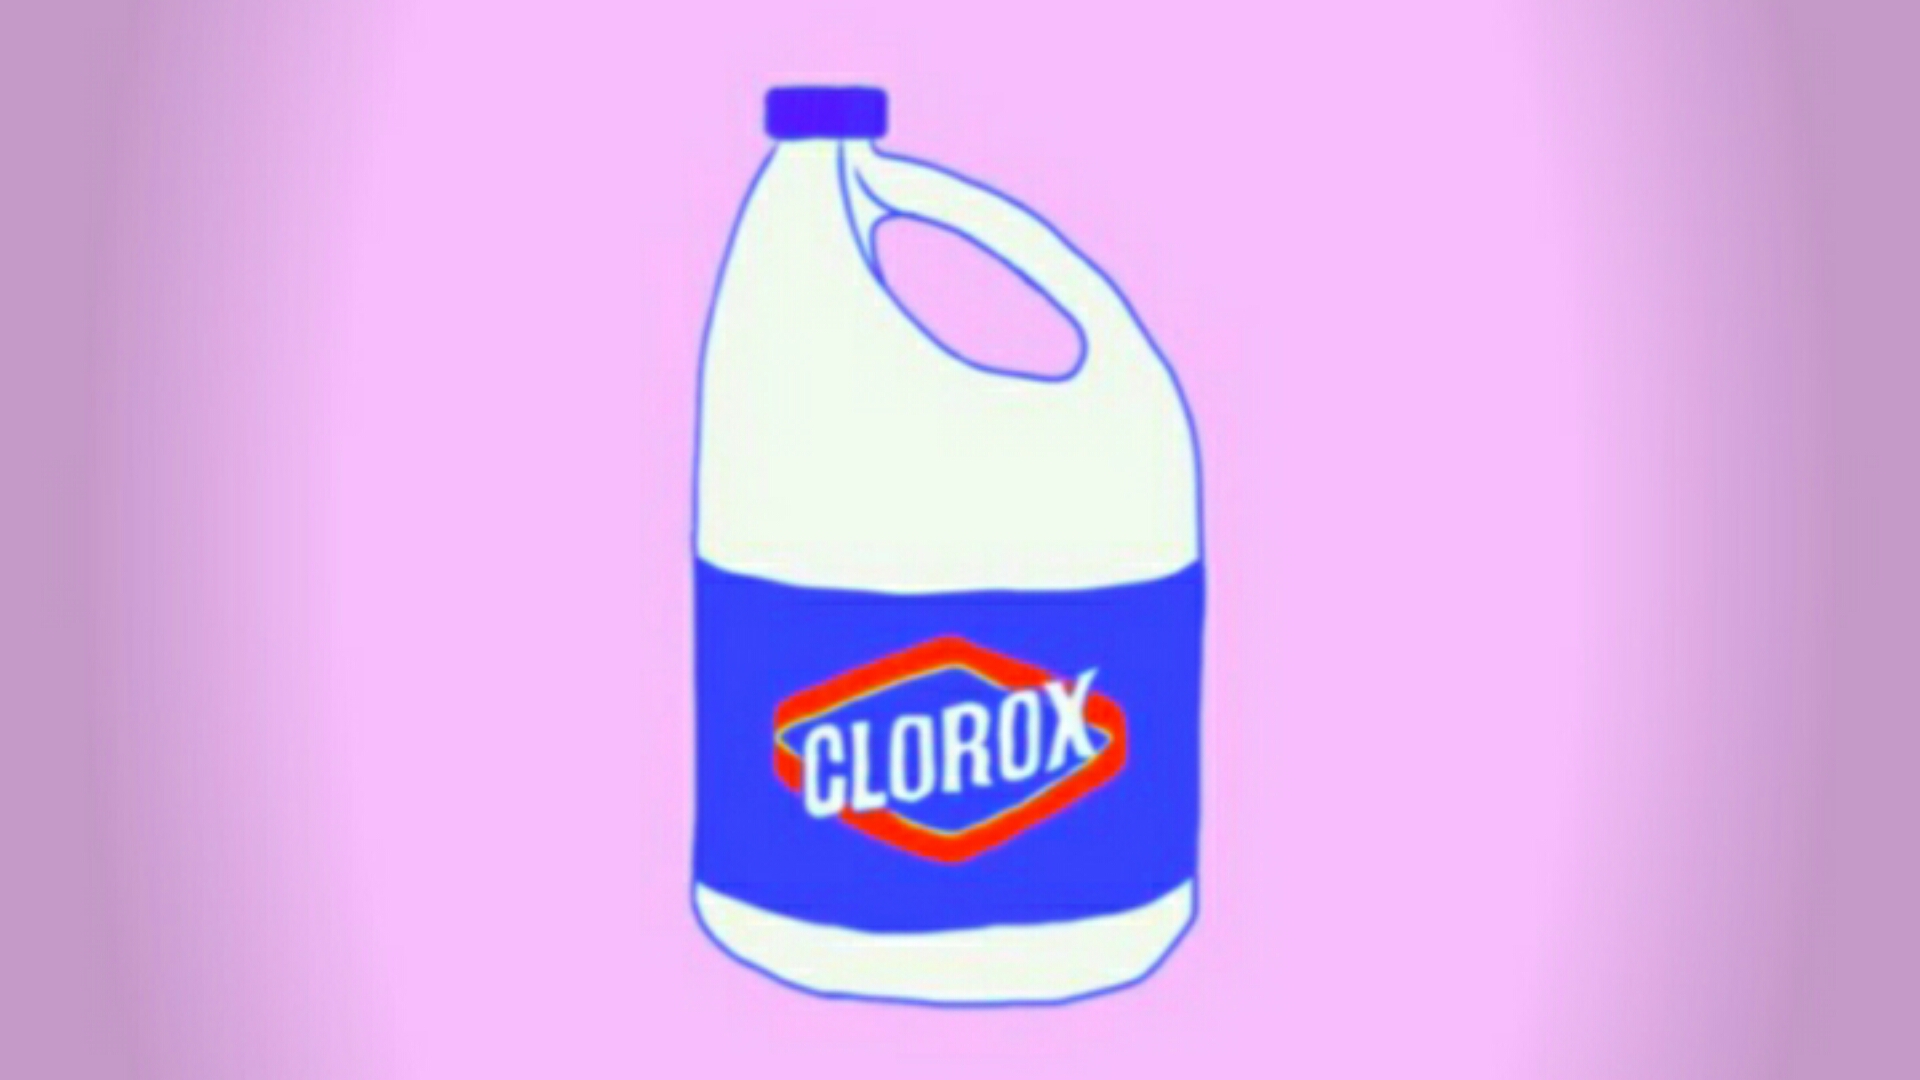 It is a bottle of Clorox with a bright pink back round, sort of the ghetto-...